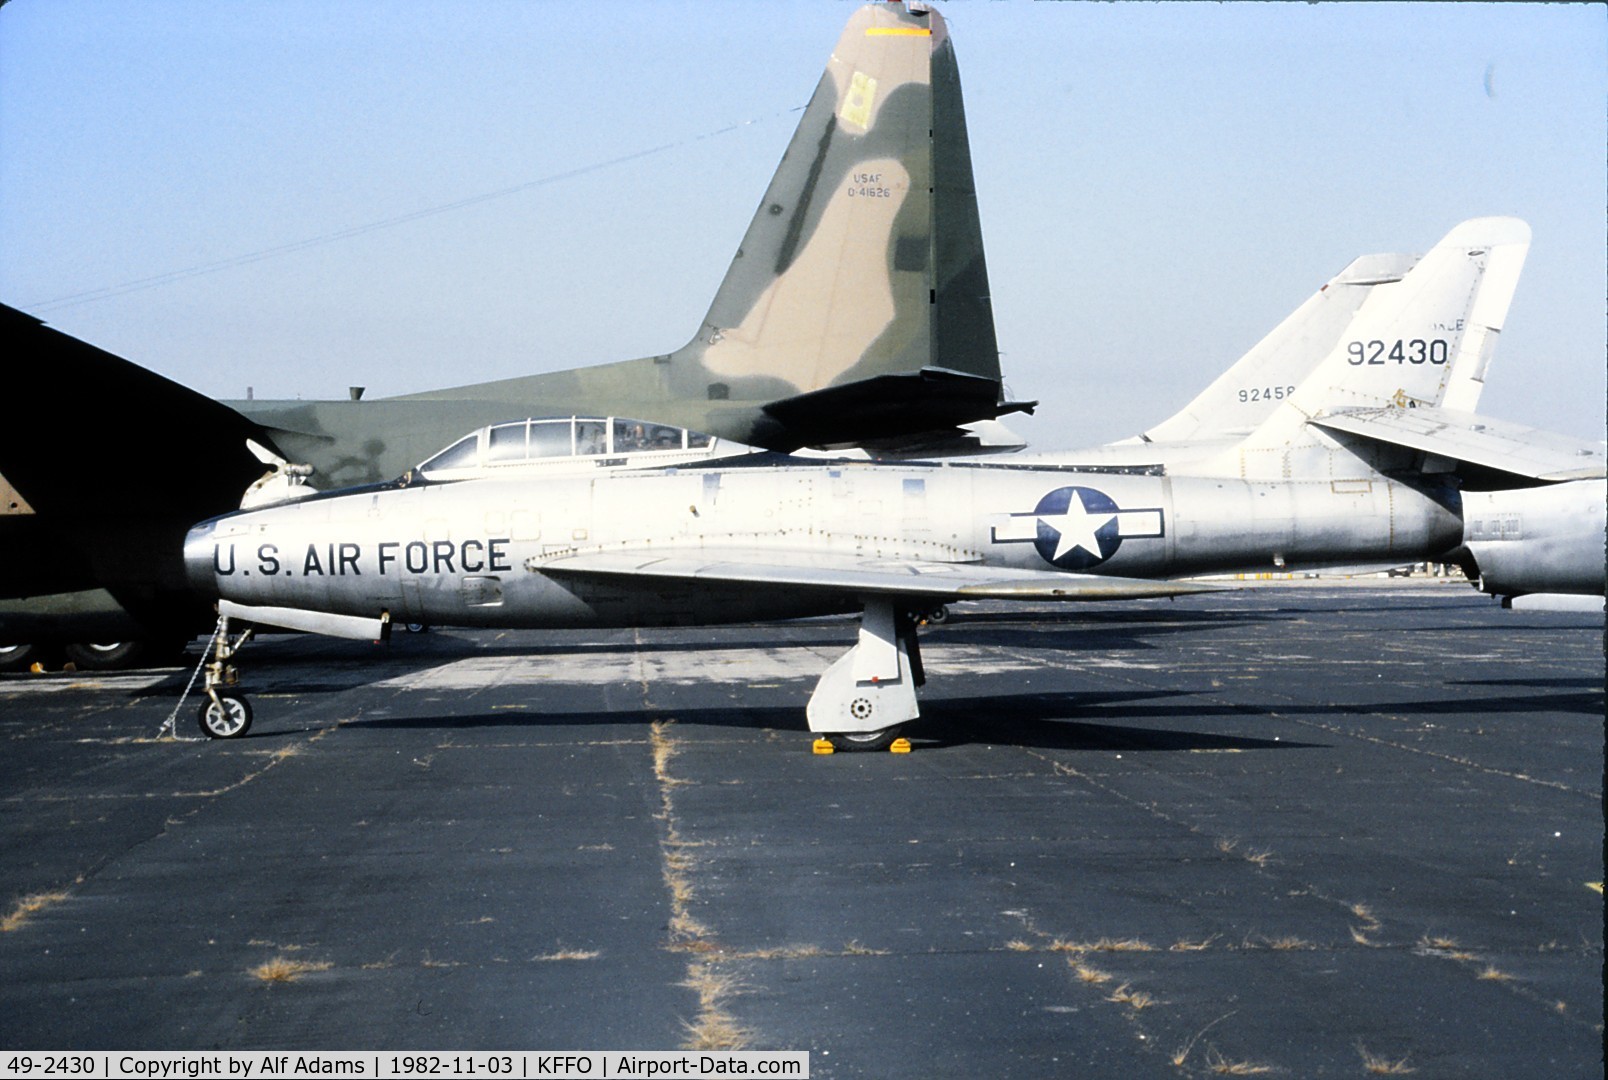 49-2430, 1950 Republic YRF-84F FICON C/N Not found 49-2430, At the USAF Museum in 1982.